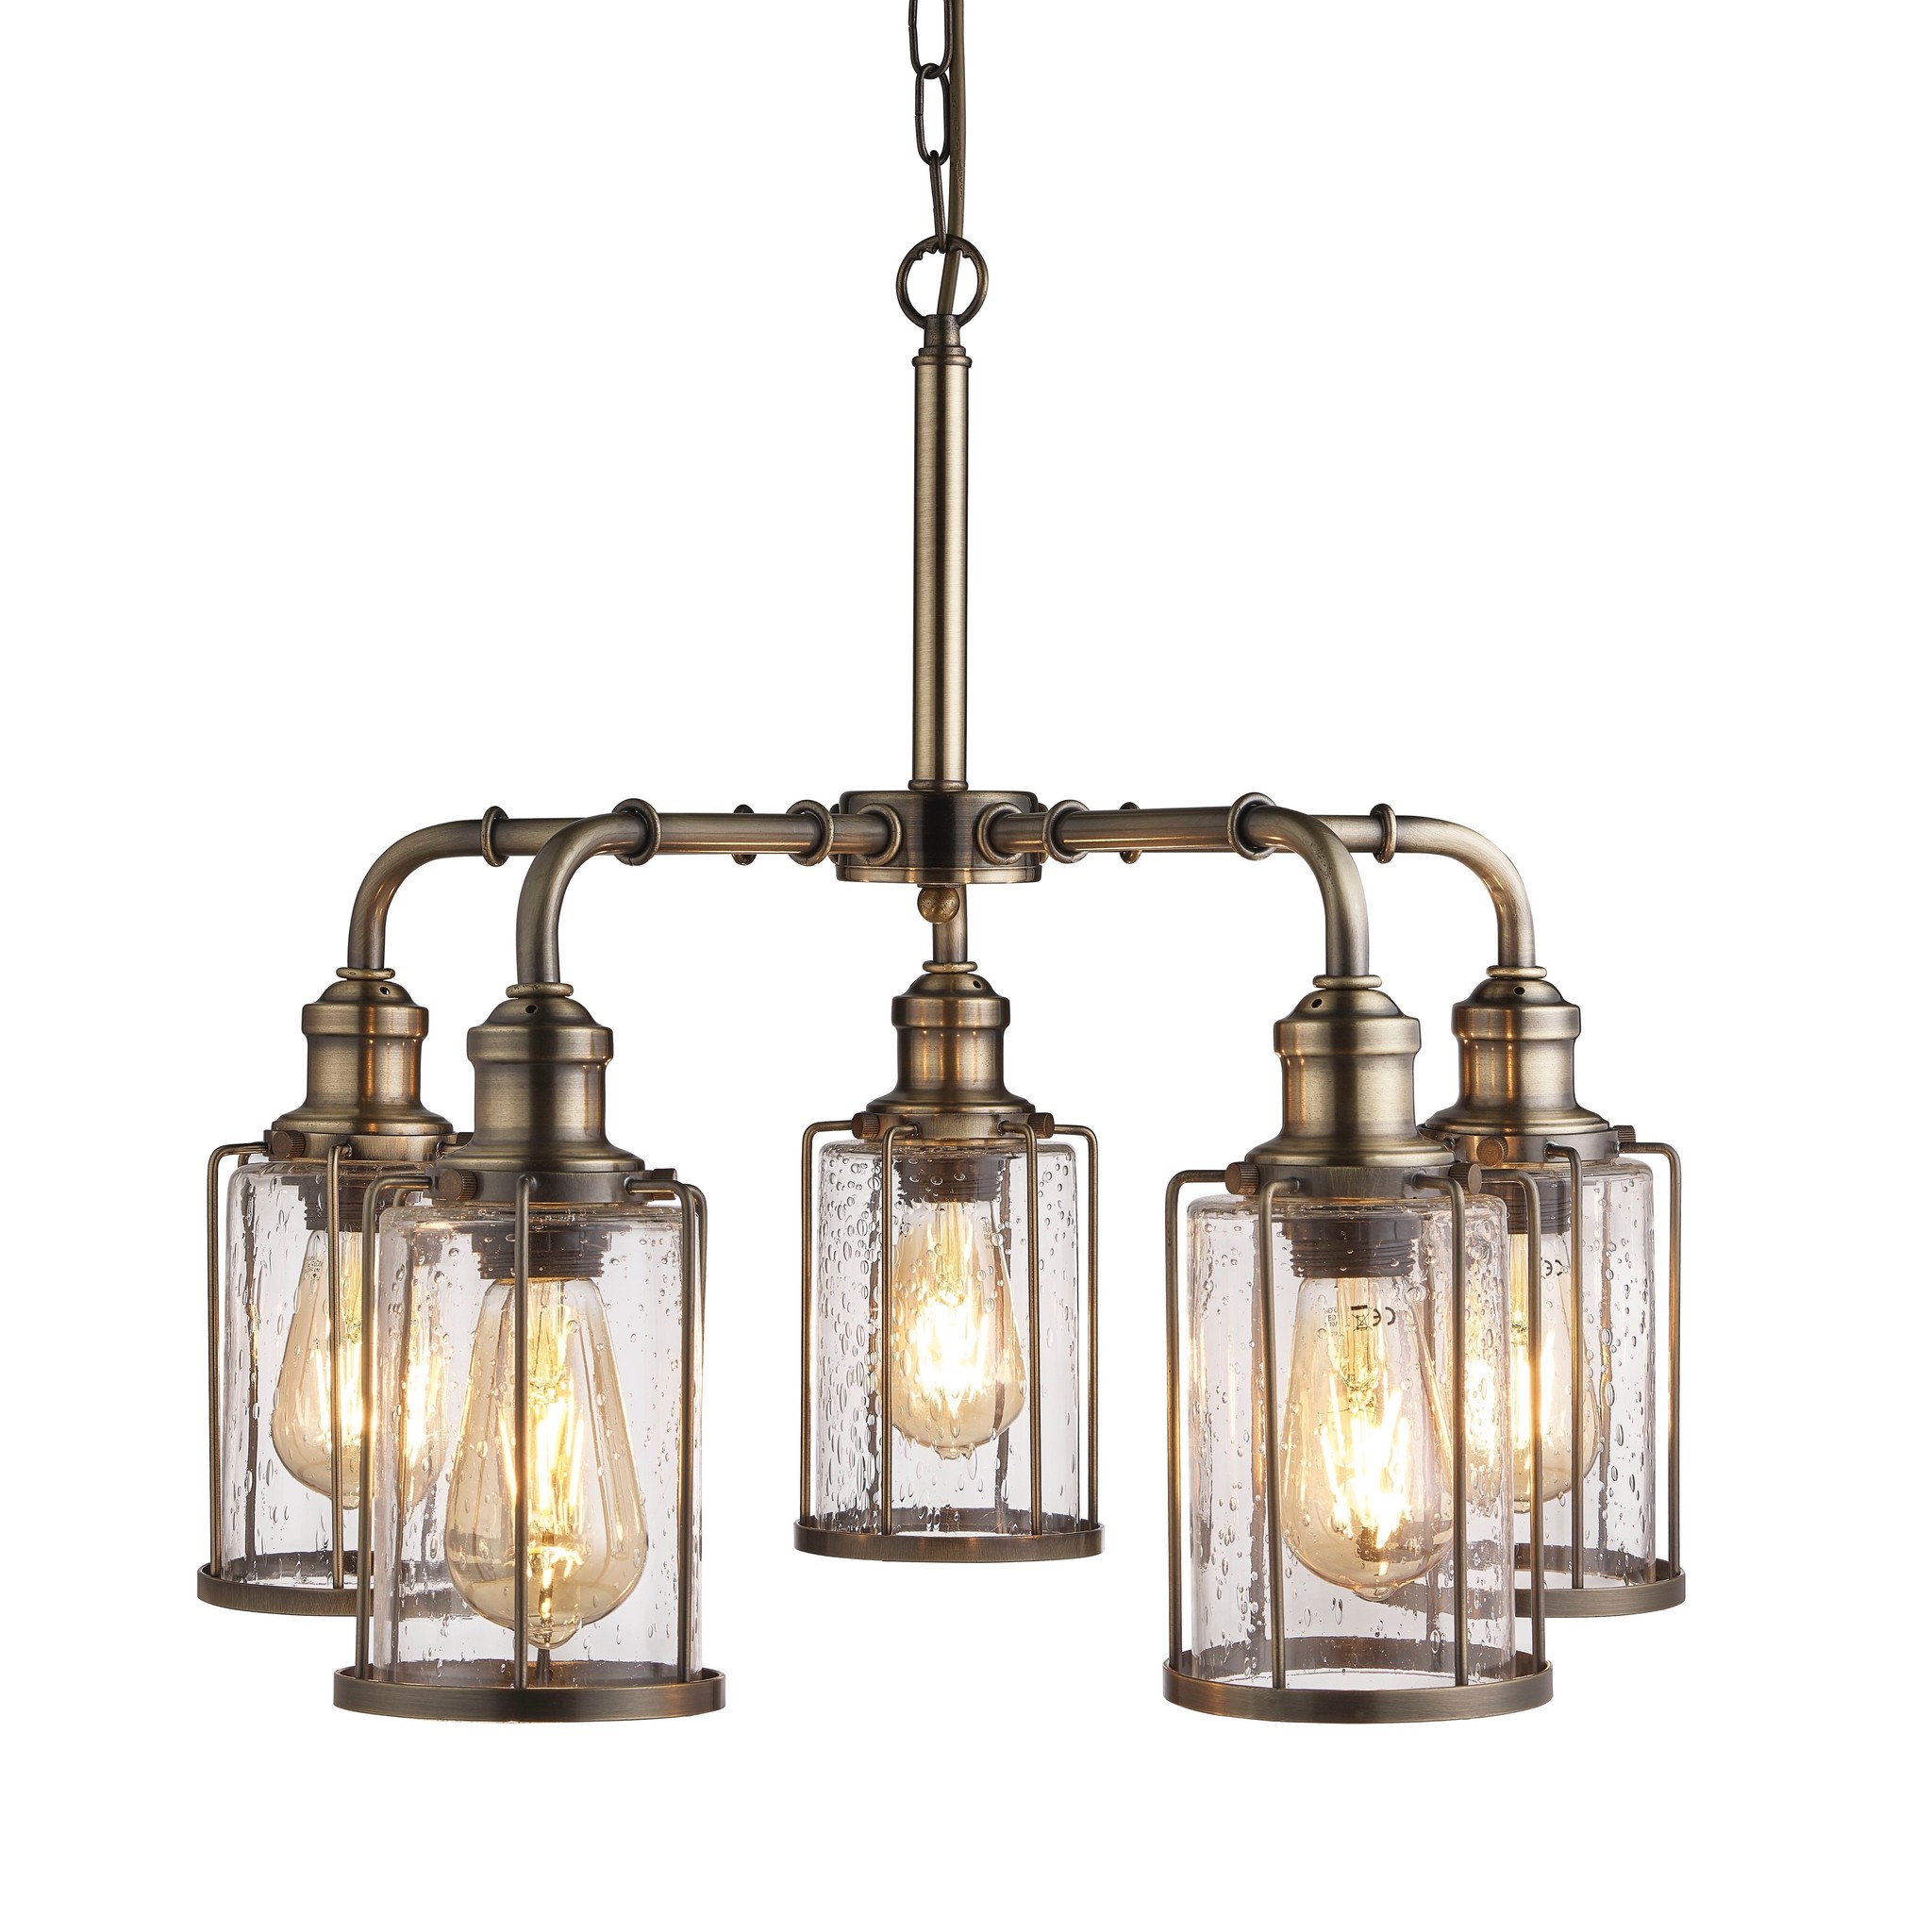 Industrial Pipe 5 Light Feature Ceiling Light Antique Brass Seeded Glass